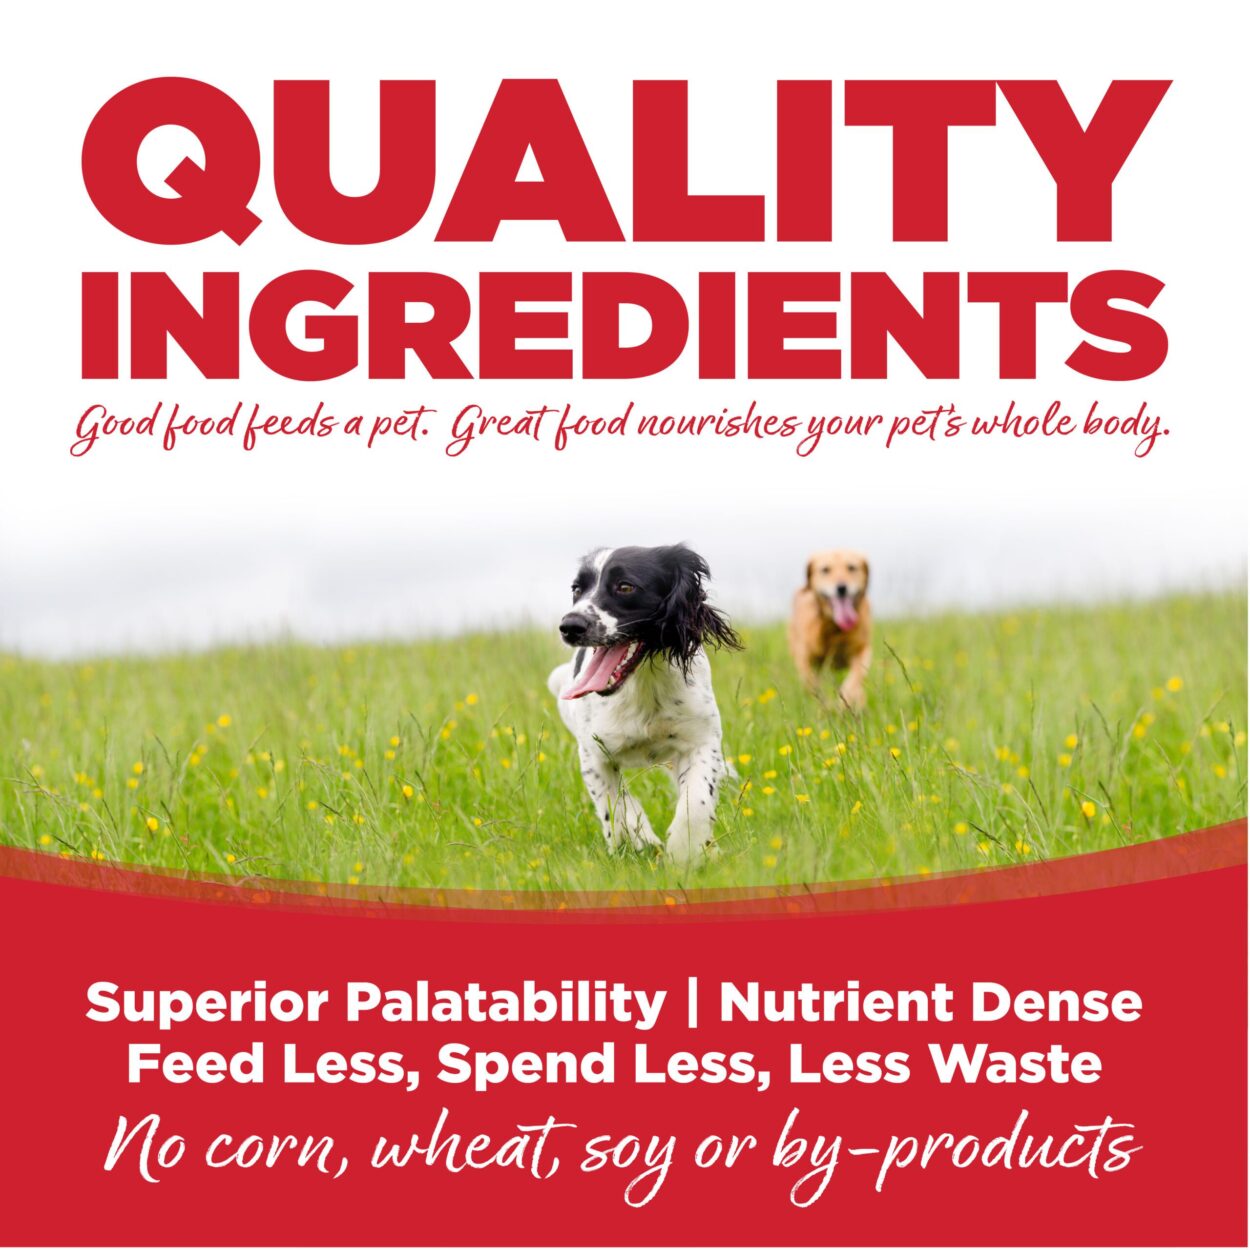 Nutrisource Large Breed Adult Beef and Rice Dry Dog Food